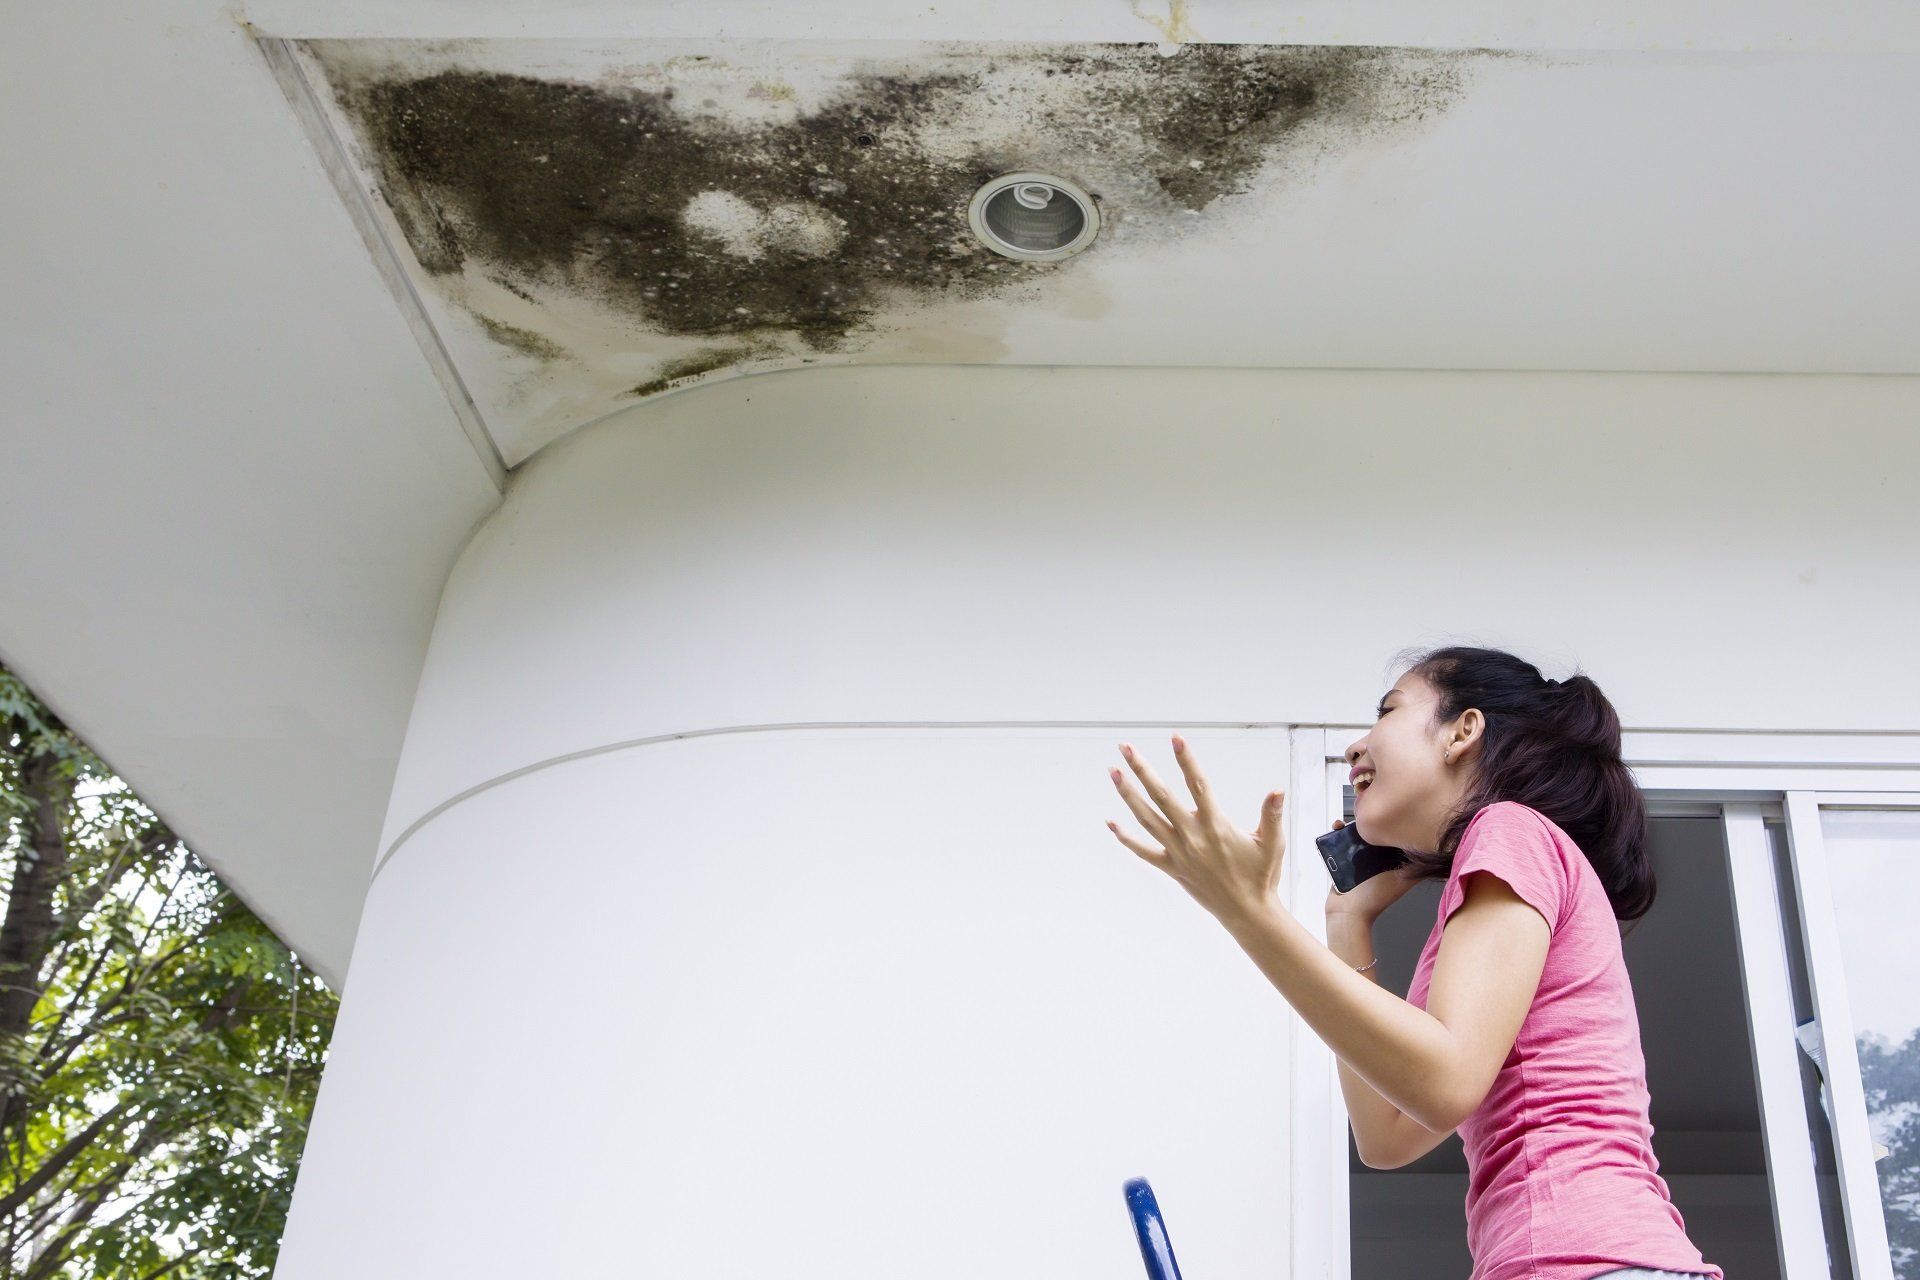 how to make a successful water leak insurance claim